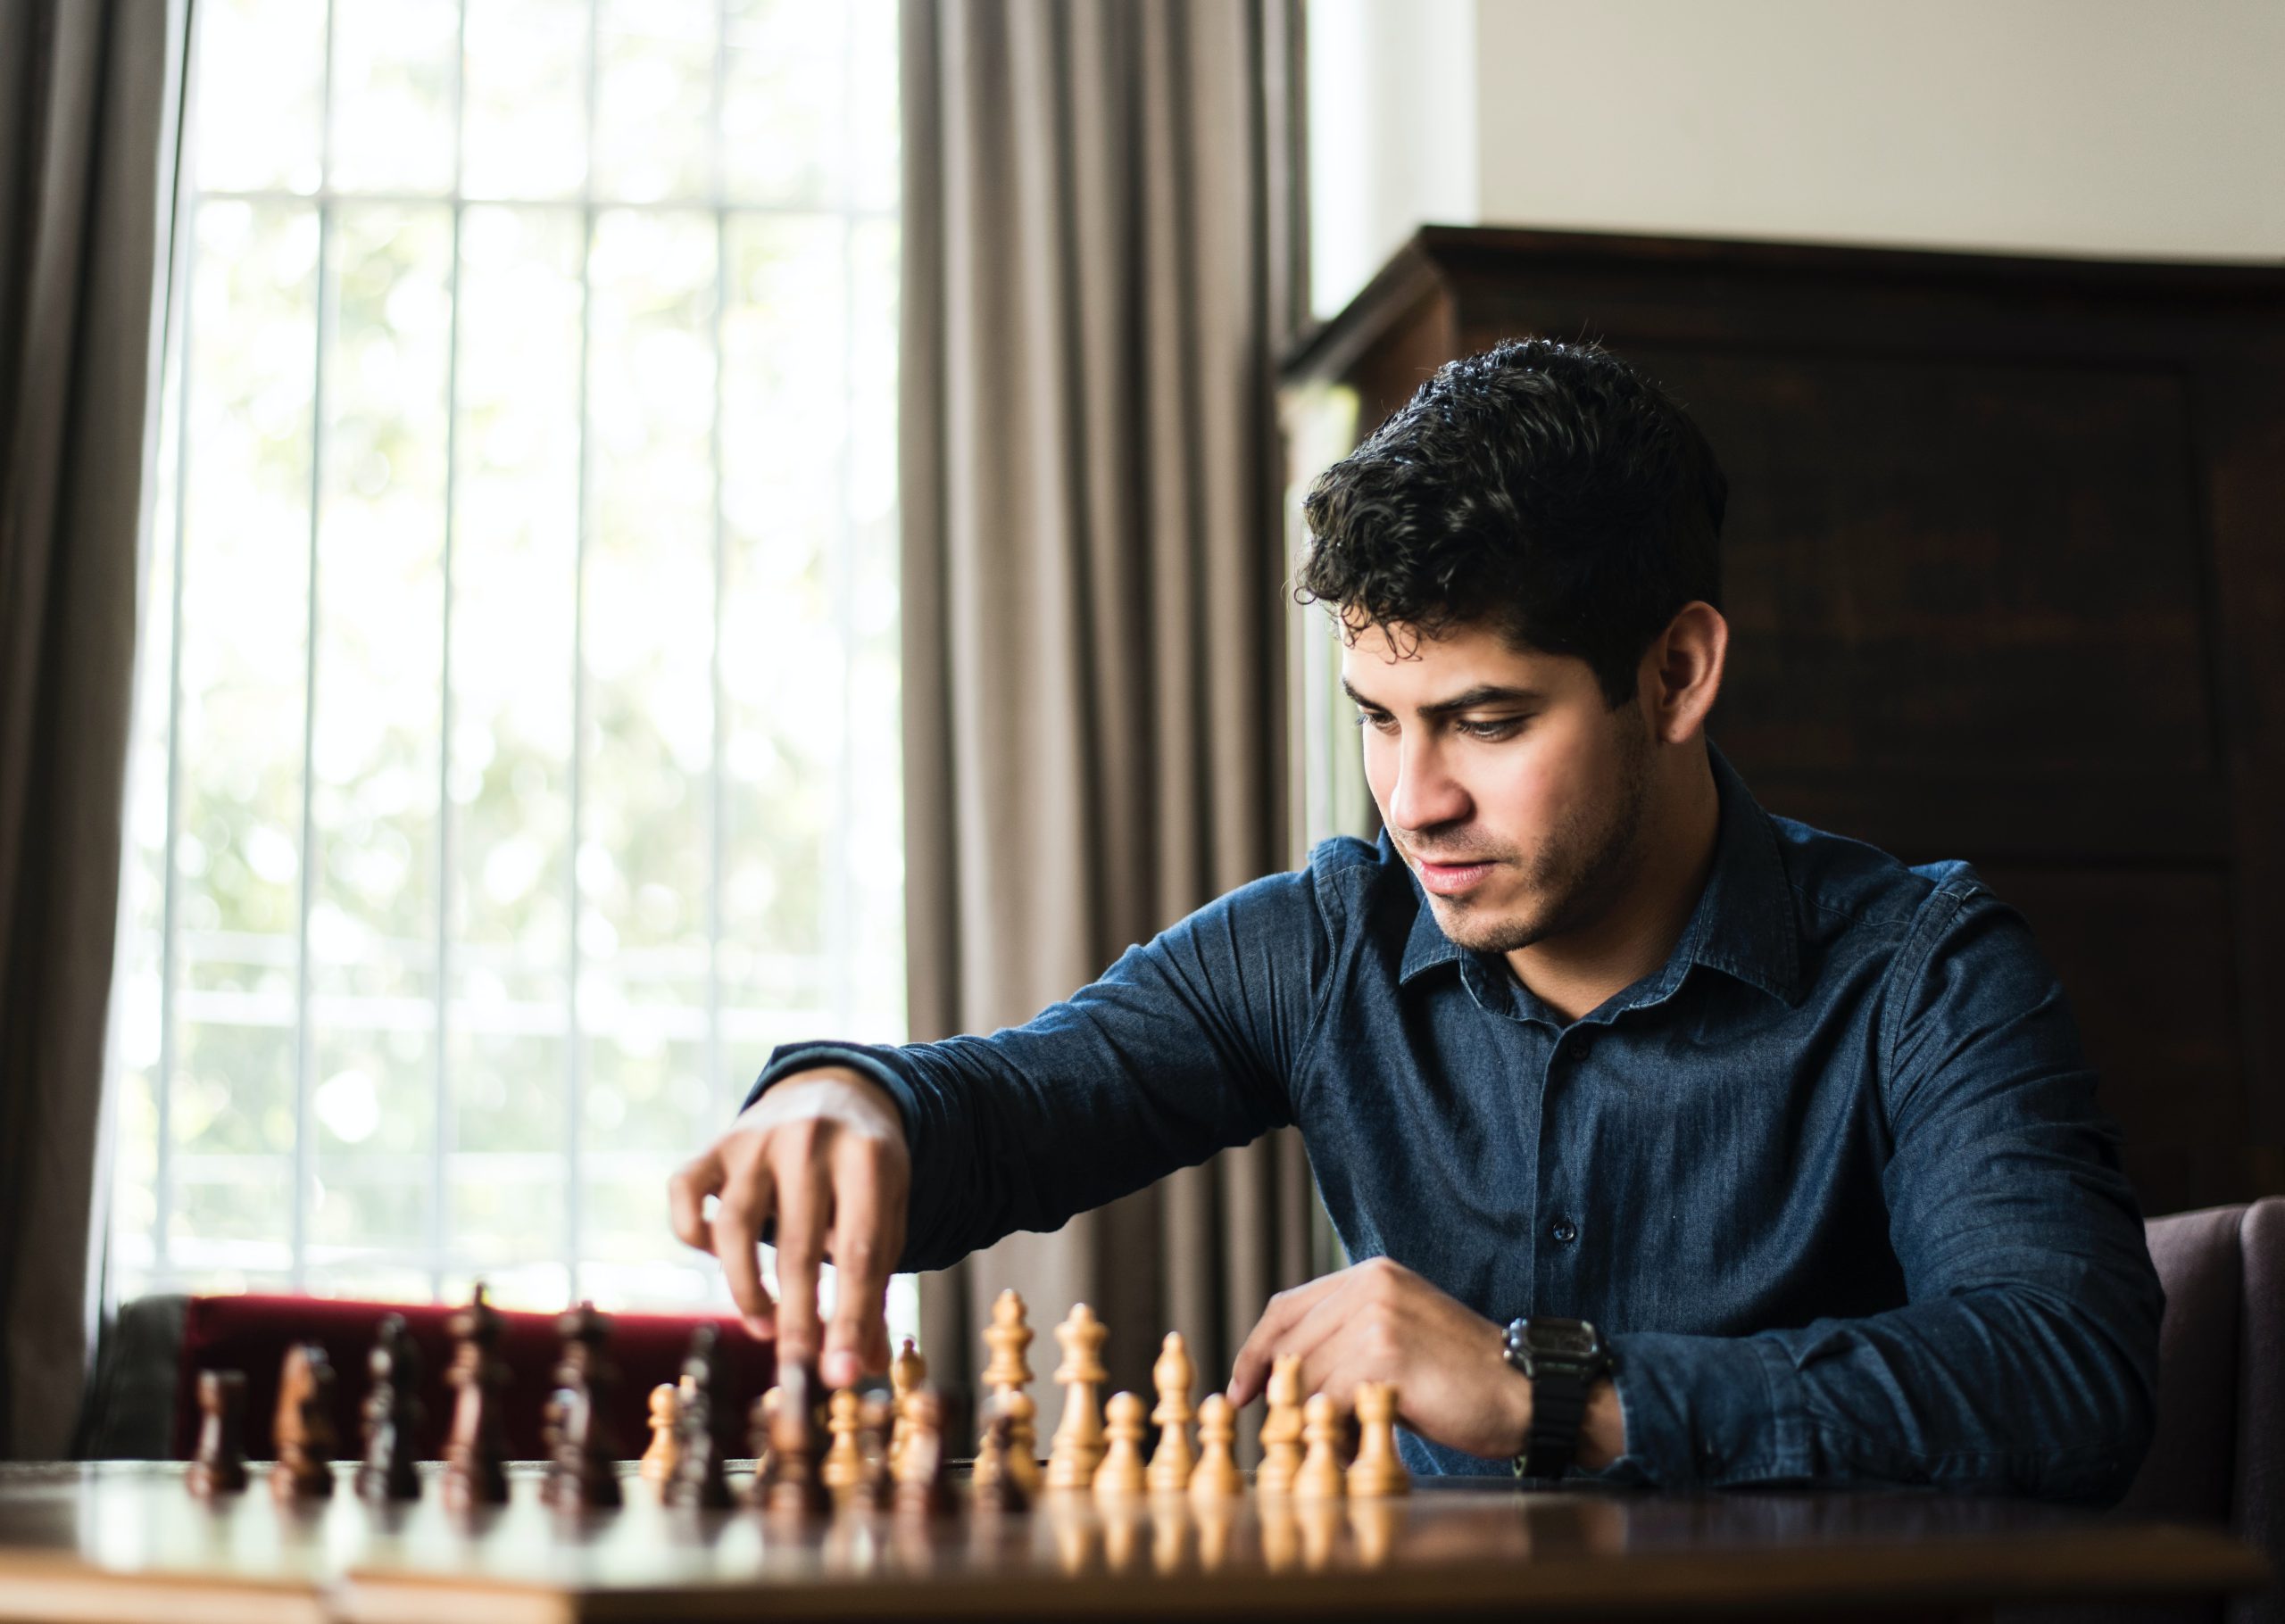 57 Inspiring Chess Quotes Worth Remembering